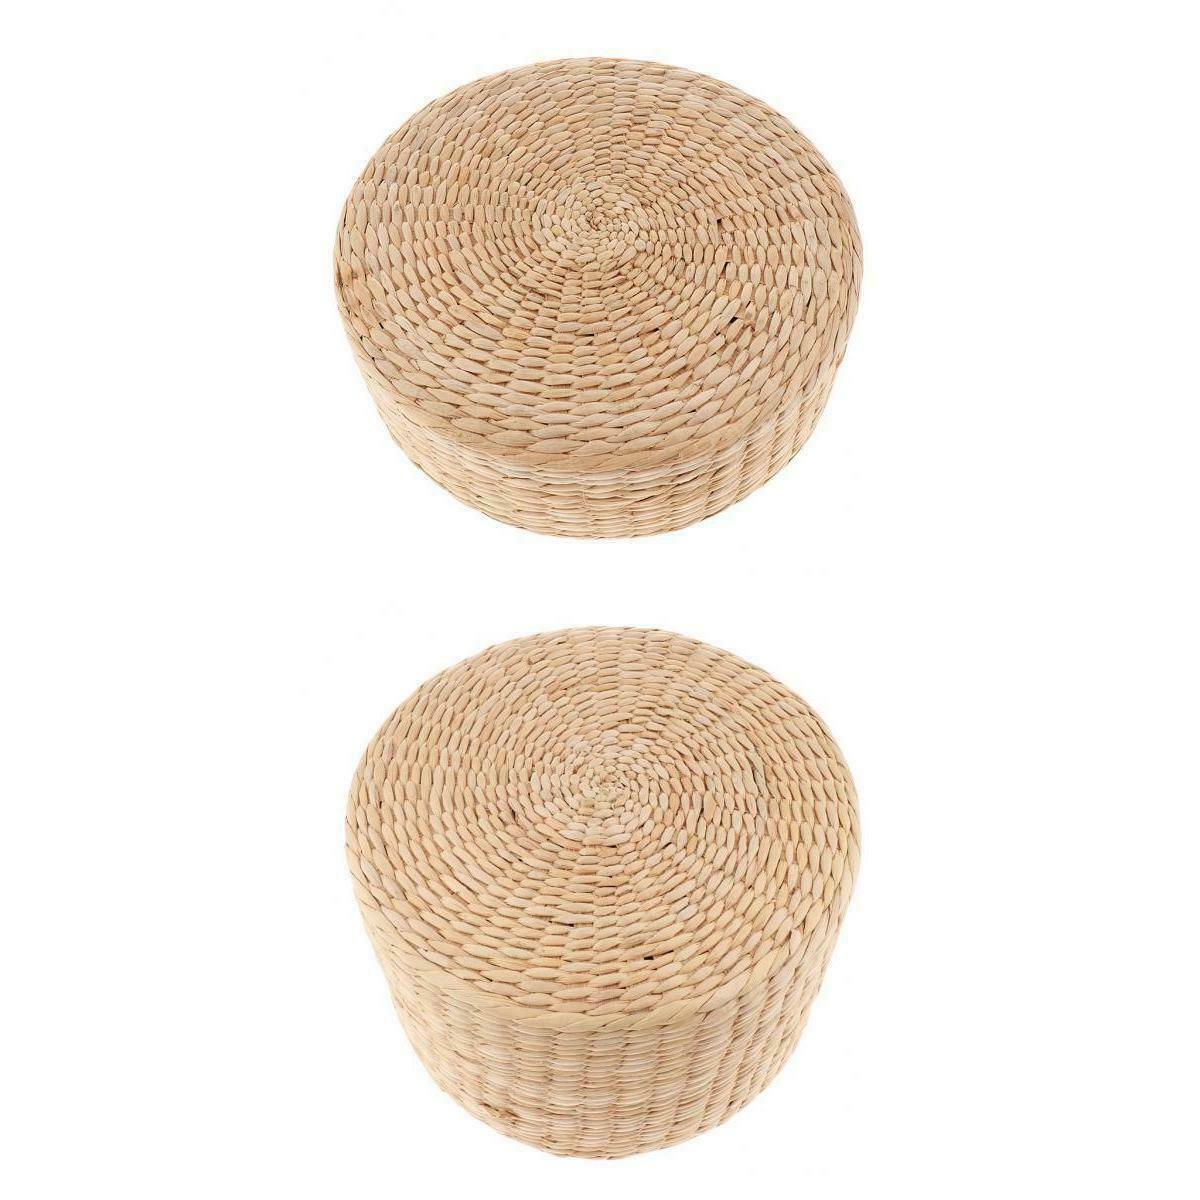 2pcs Japanese Style Straw Cushion Floor Seat Cushion for Reading Relaxation